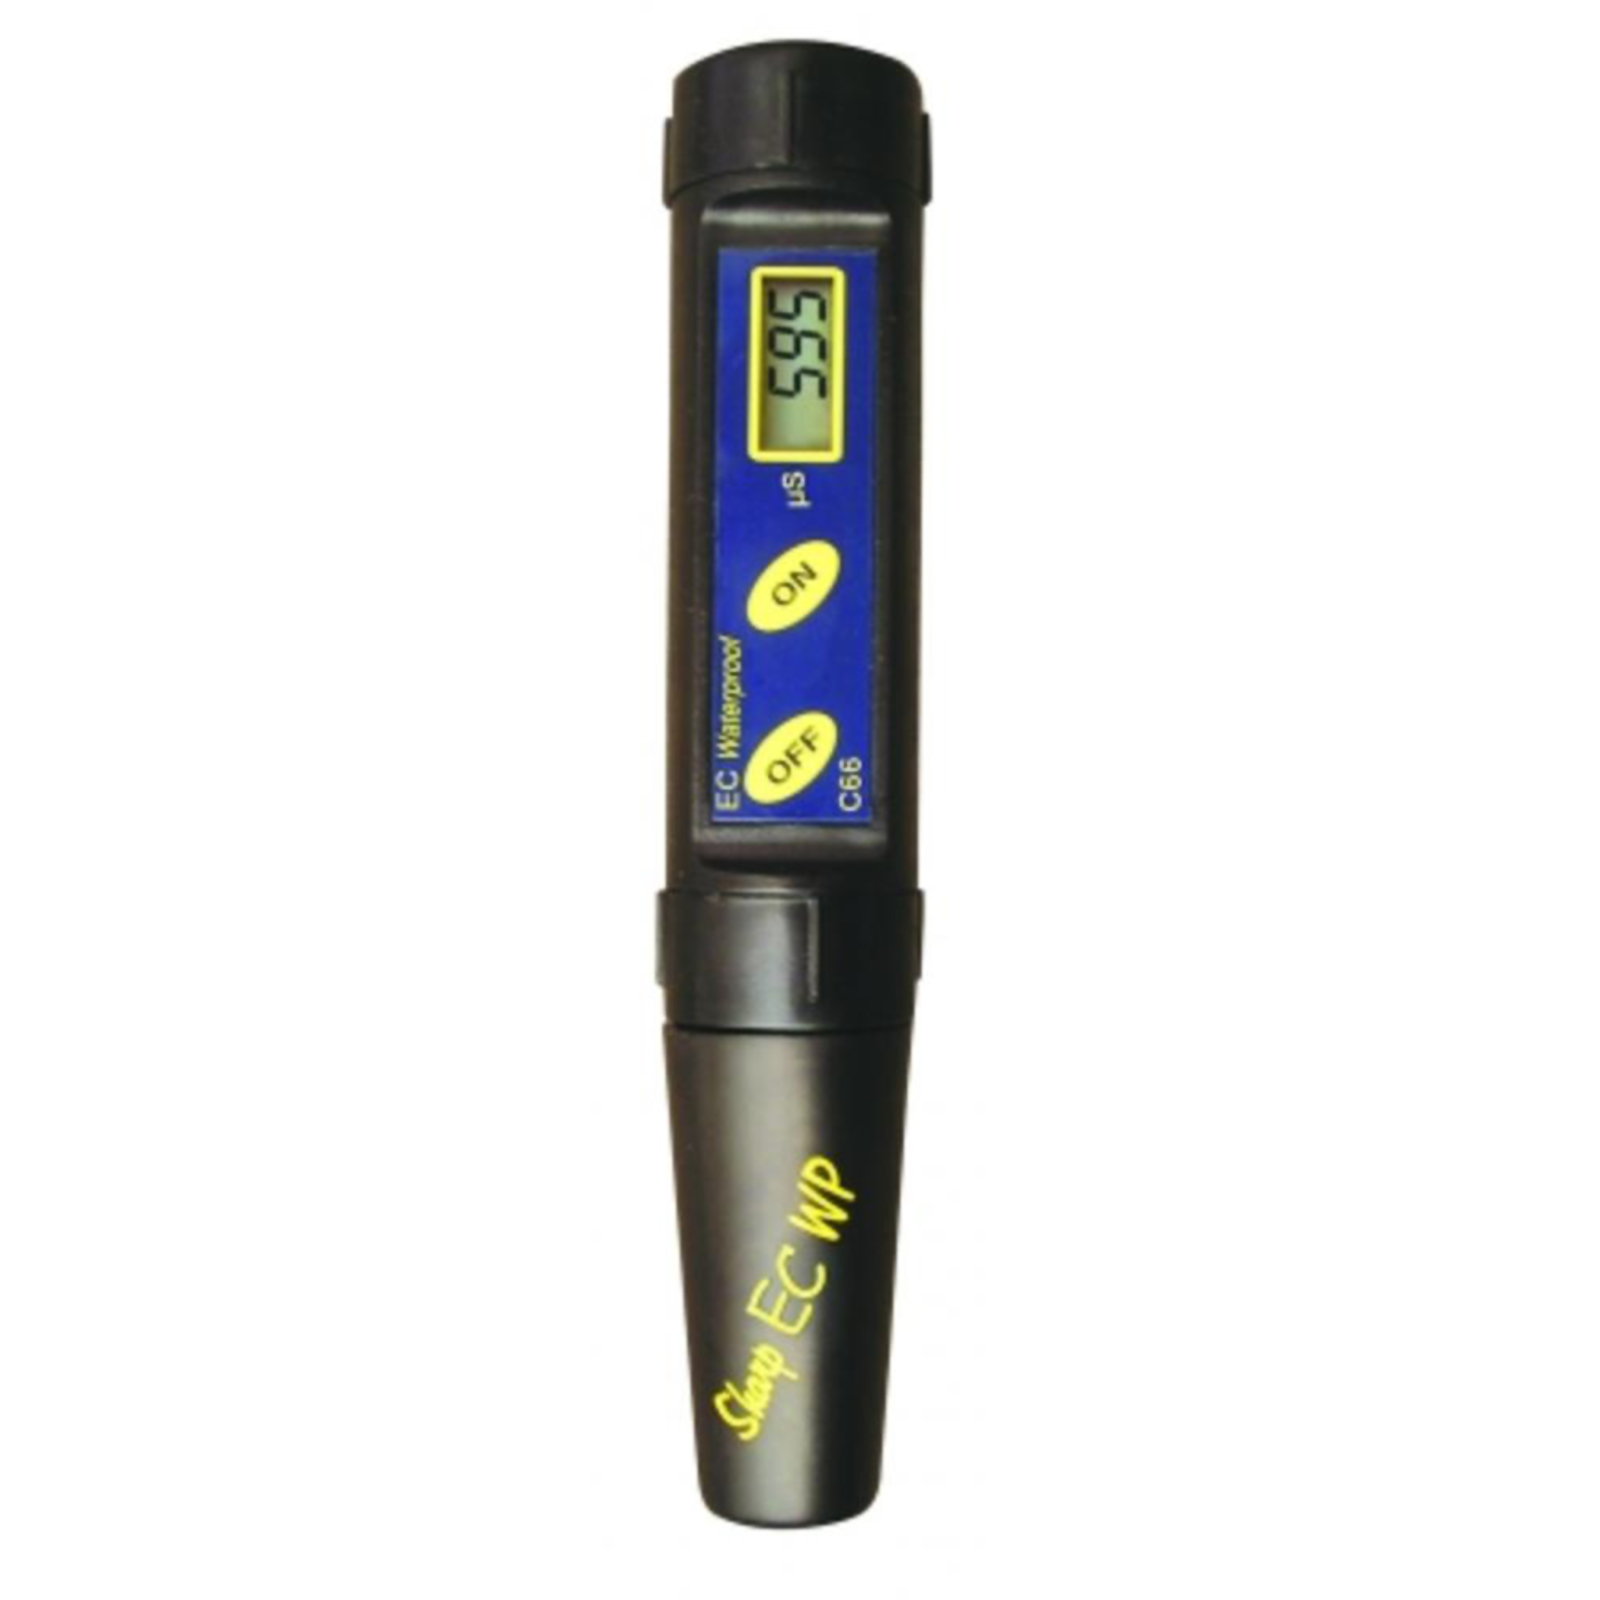 Milwaukee C66 Waterproof Conductivity Tester with Replaceable Electrode and Battery